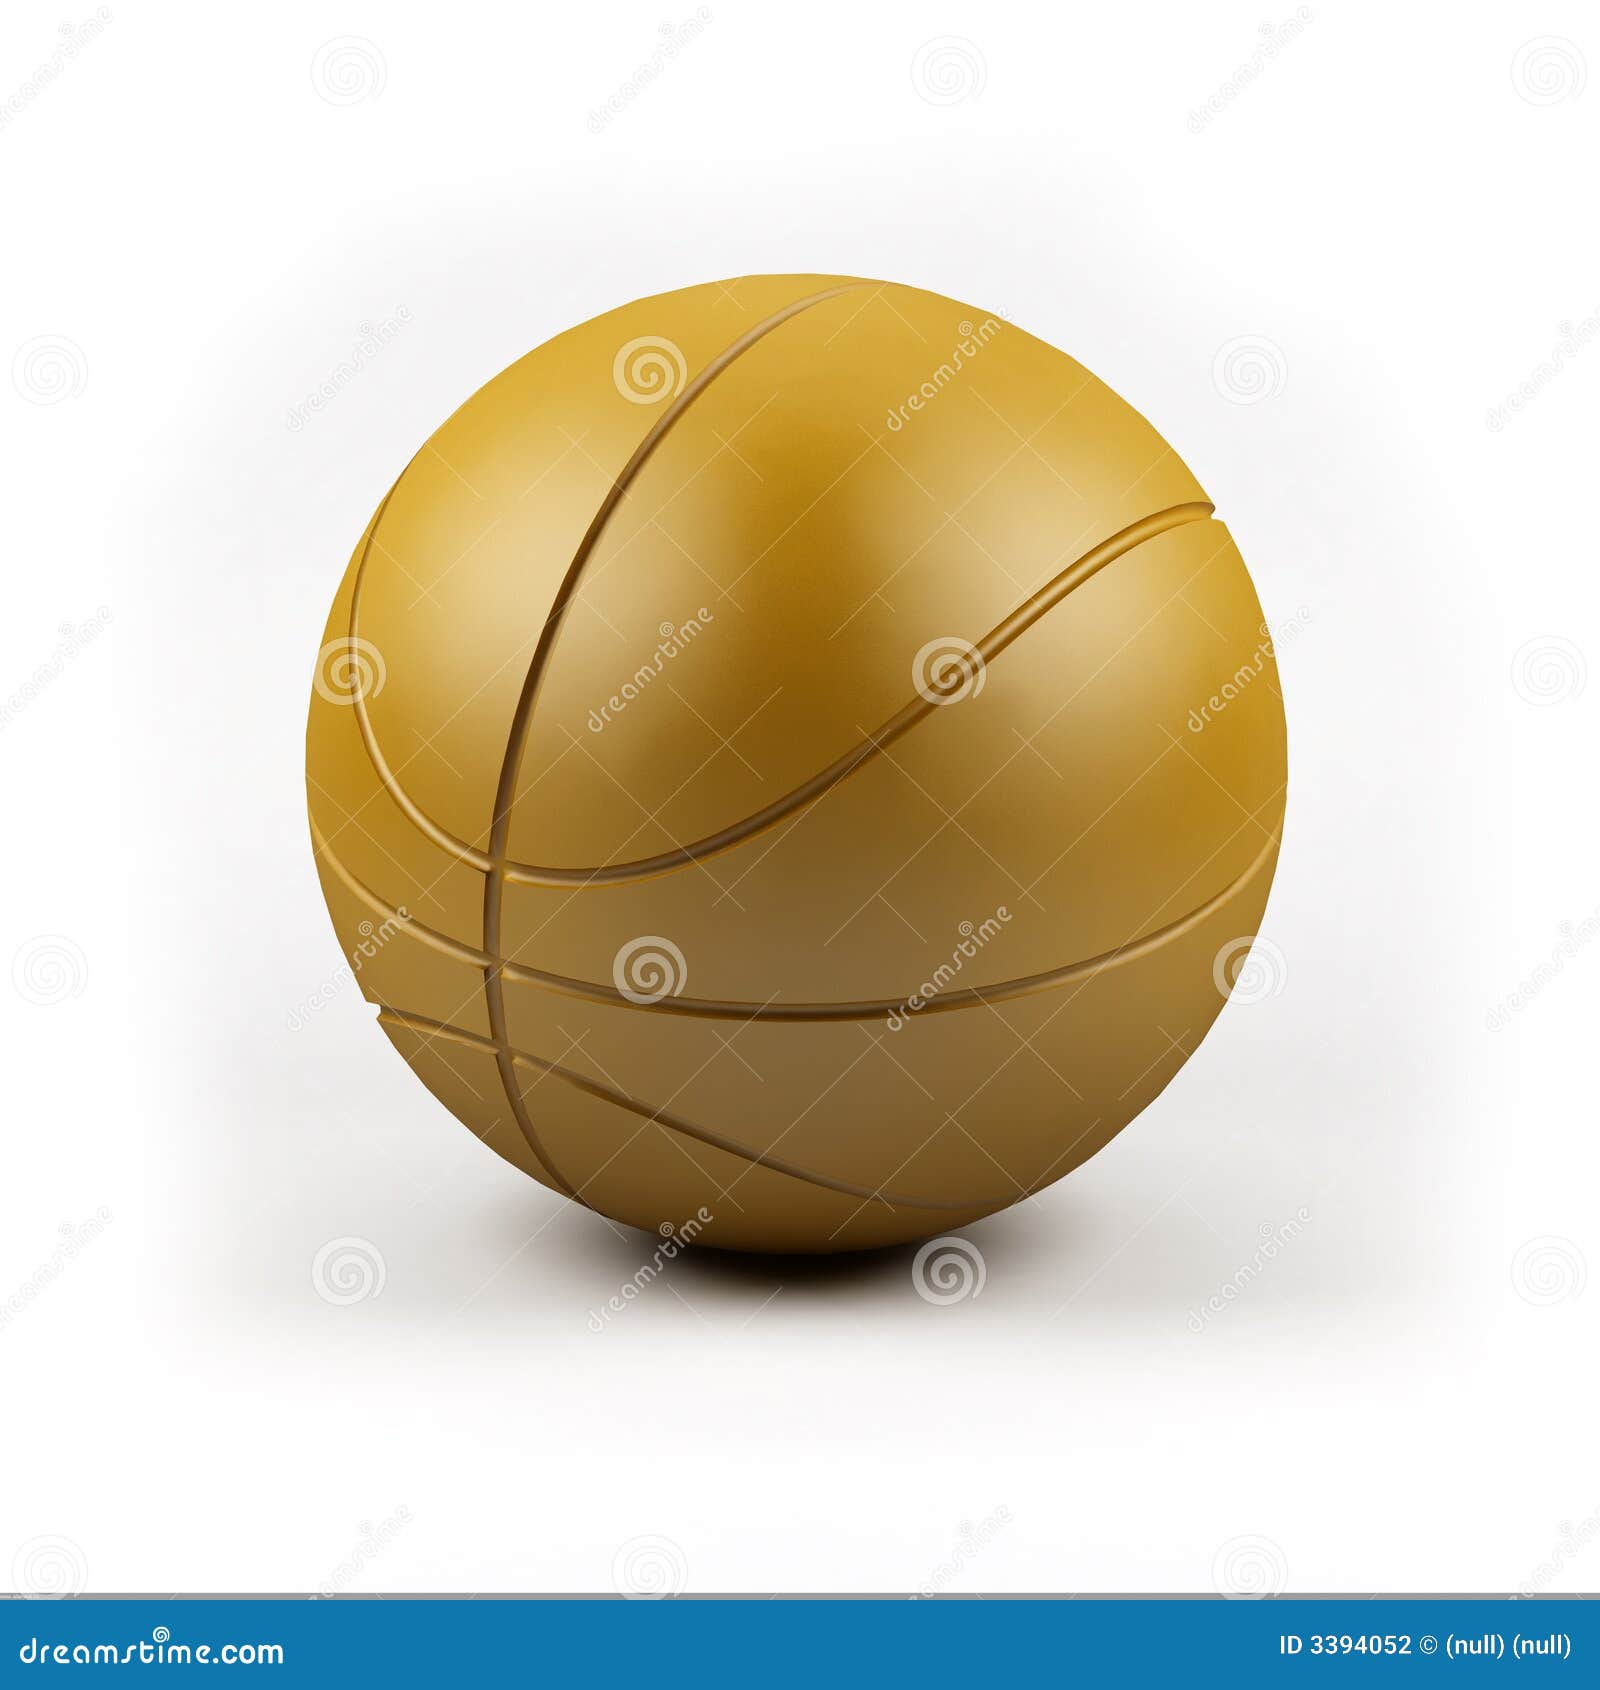 a render of a basketball